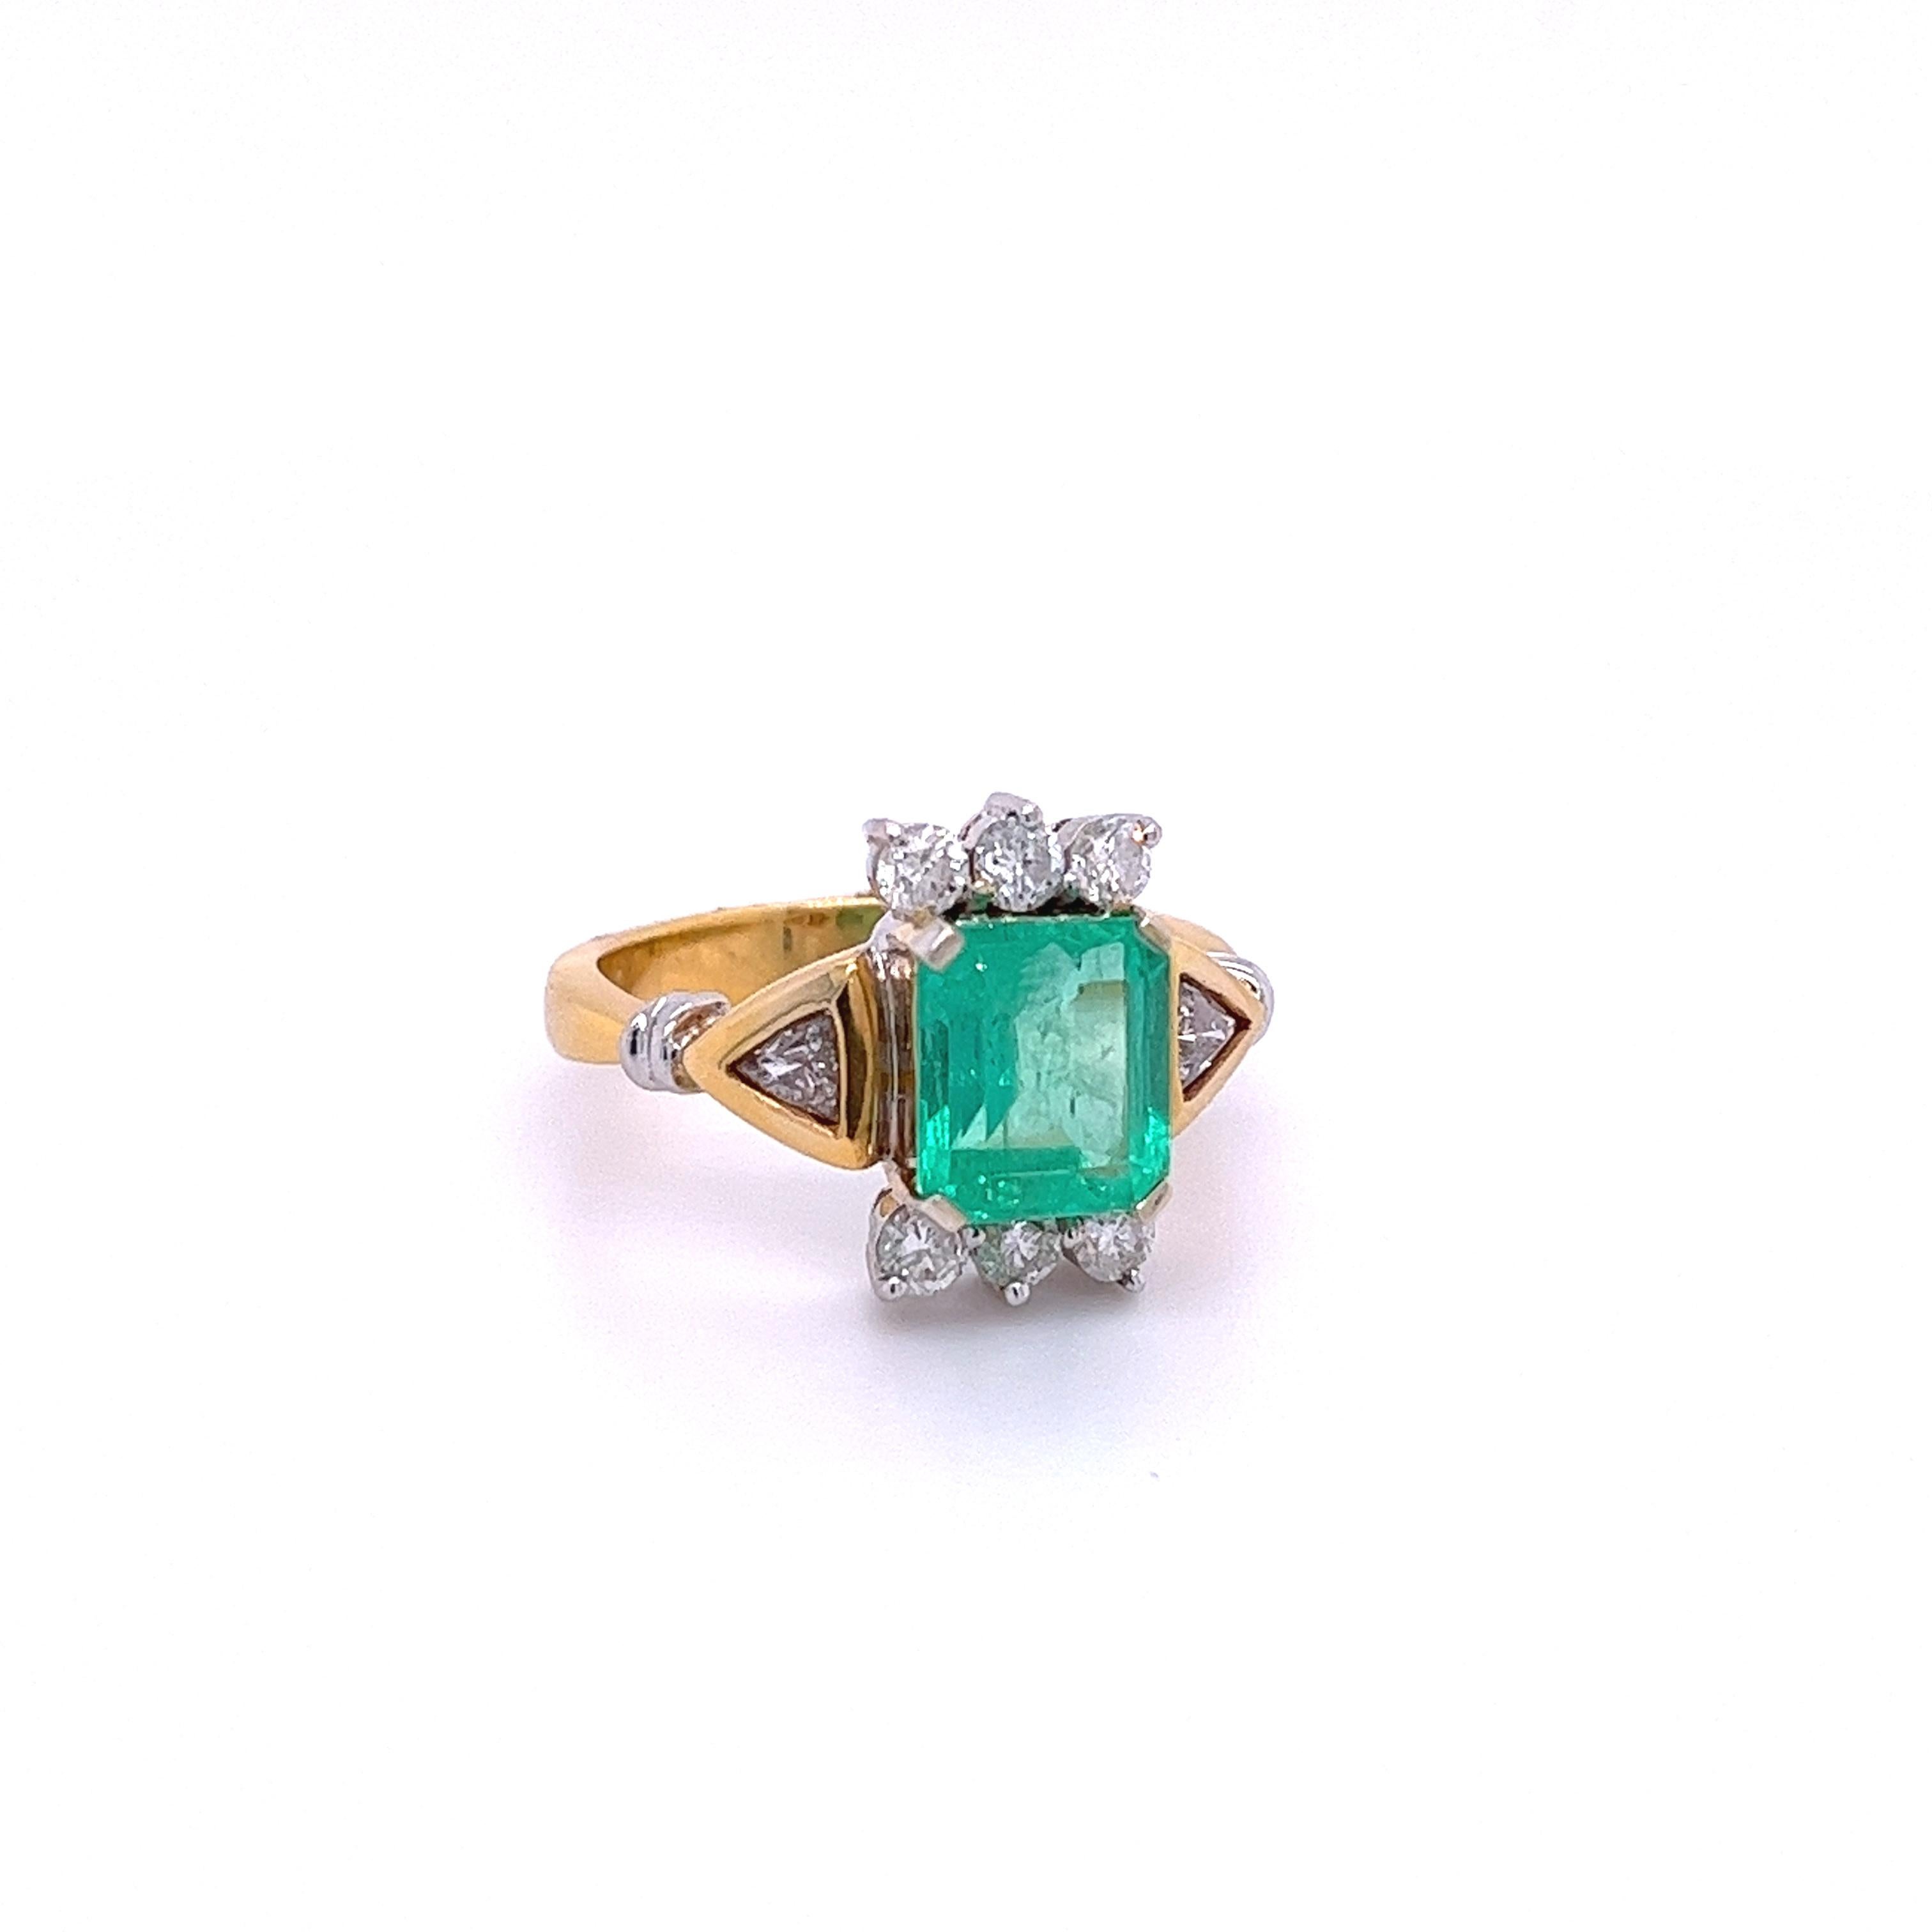 2.77 Carat Colombian Emerald and Trillion Cut Diamonds in 18k Yellow Gold Ring For Sale 1